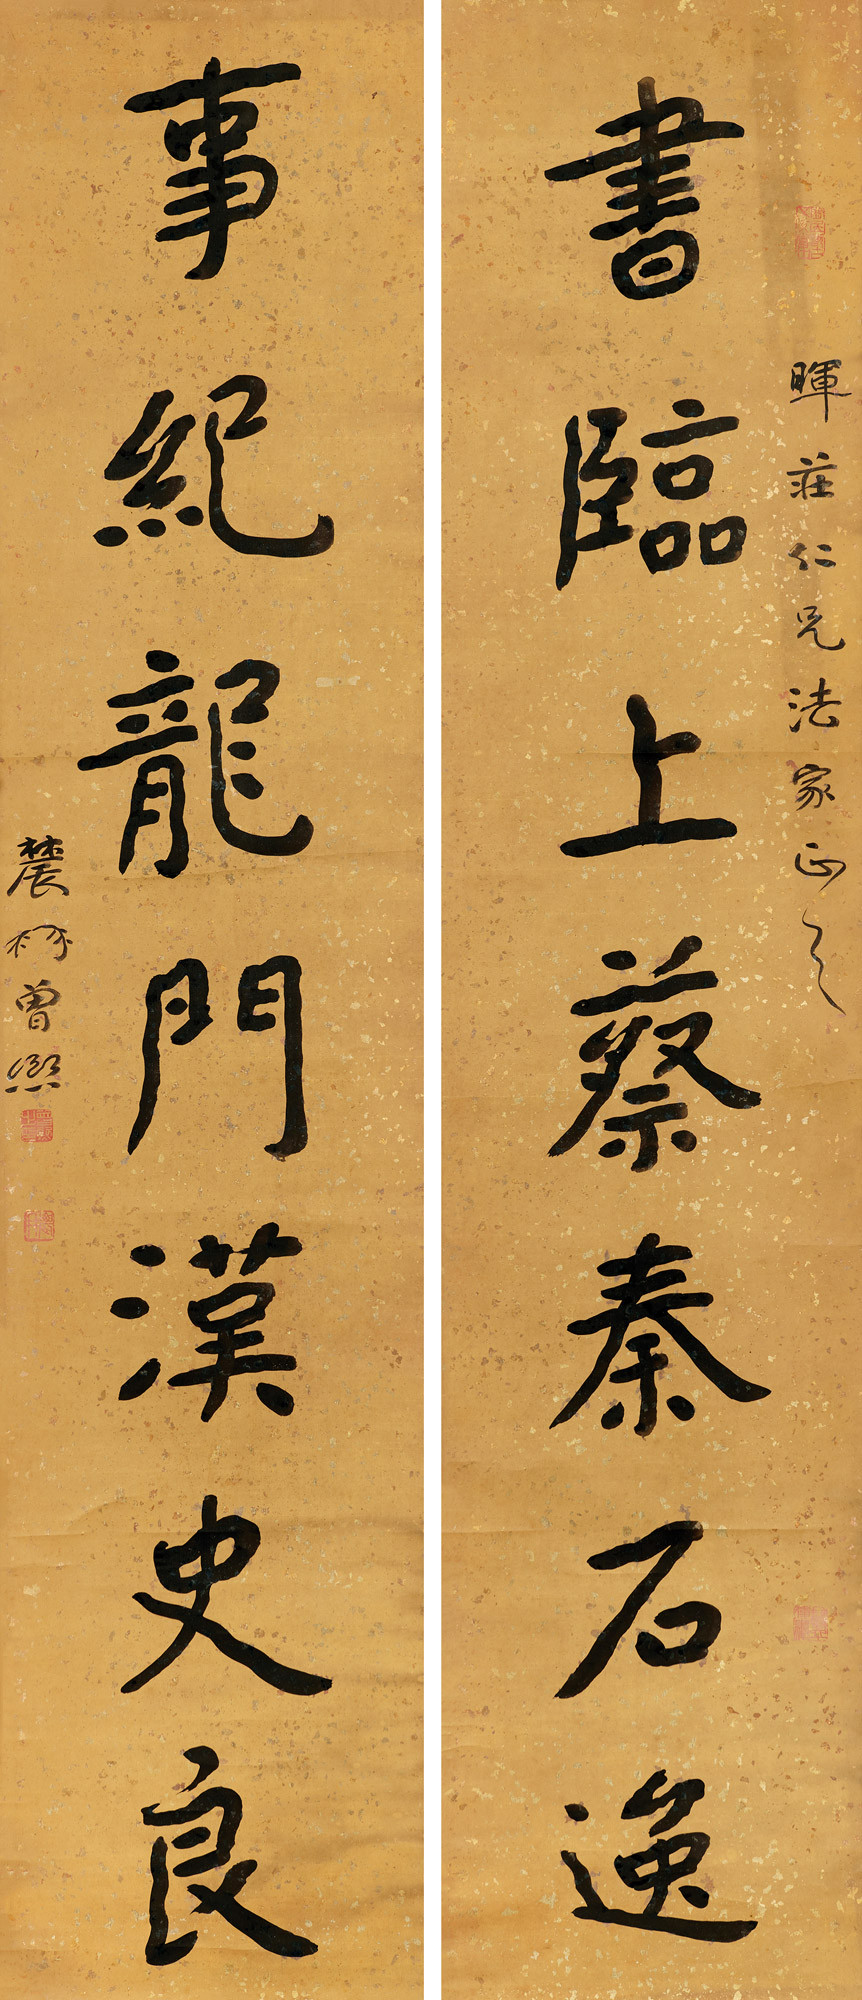 Seven - Characters Calligraphic Couplet in Seal Script